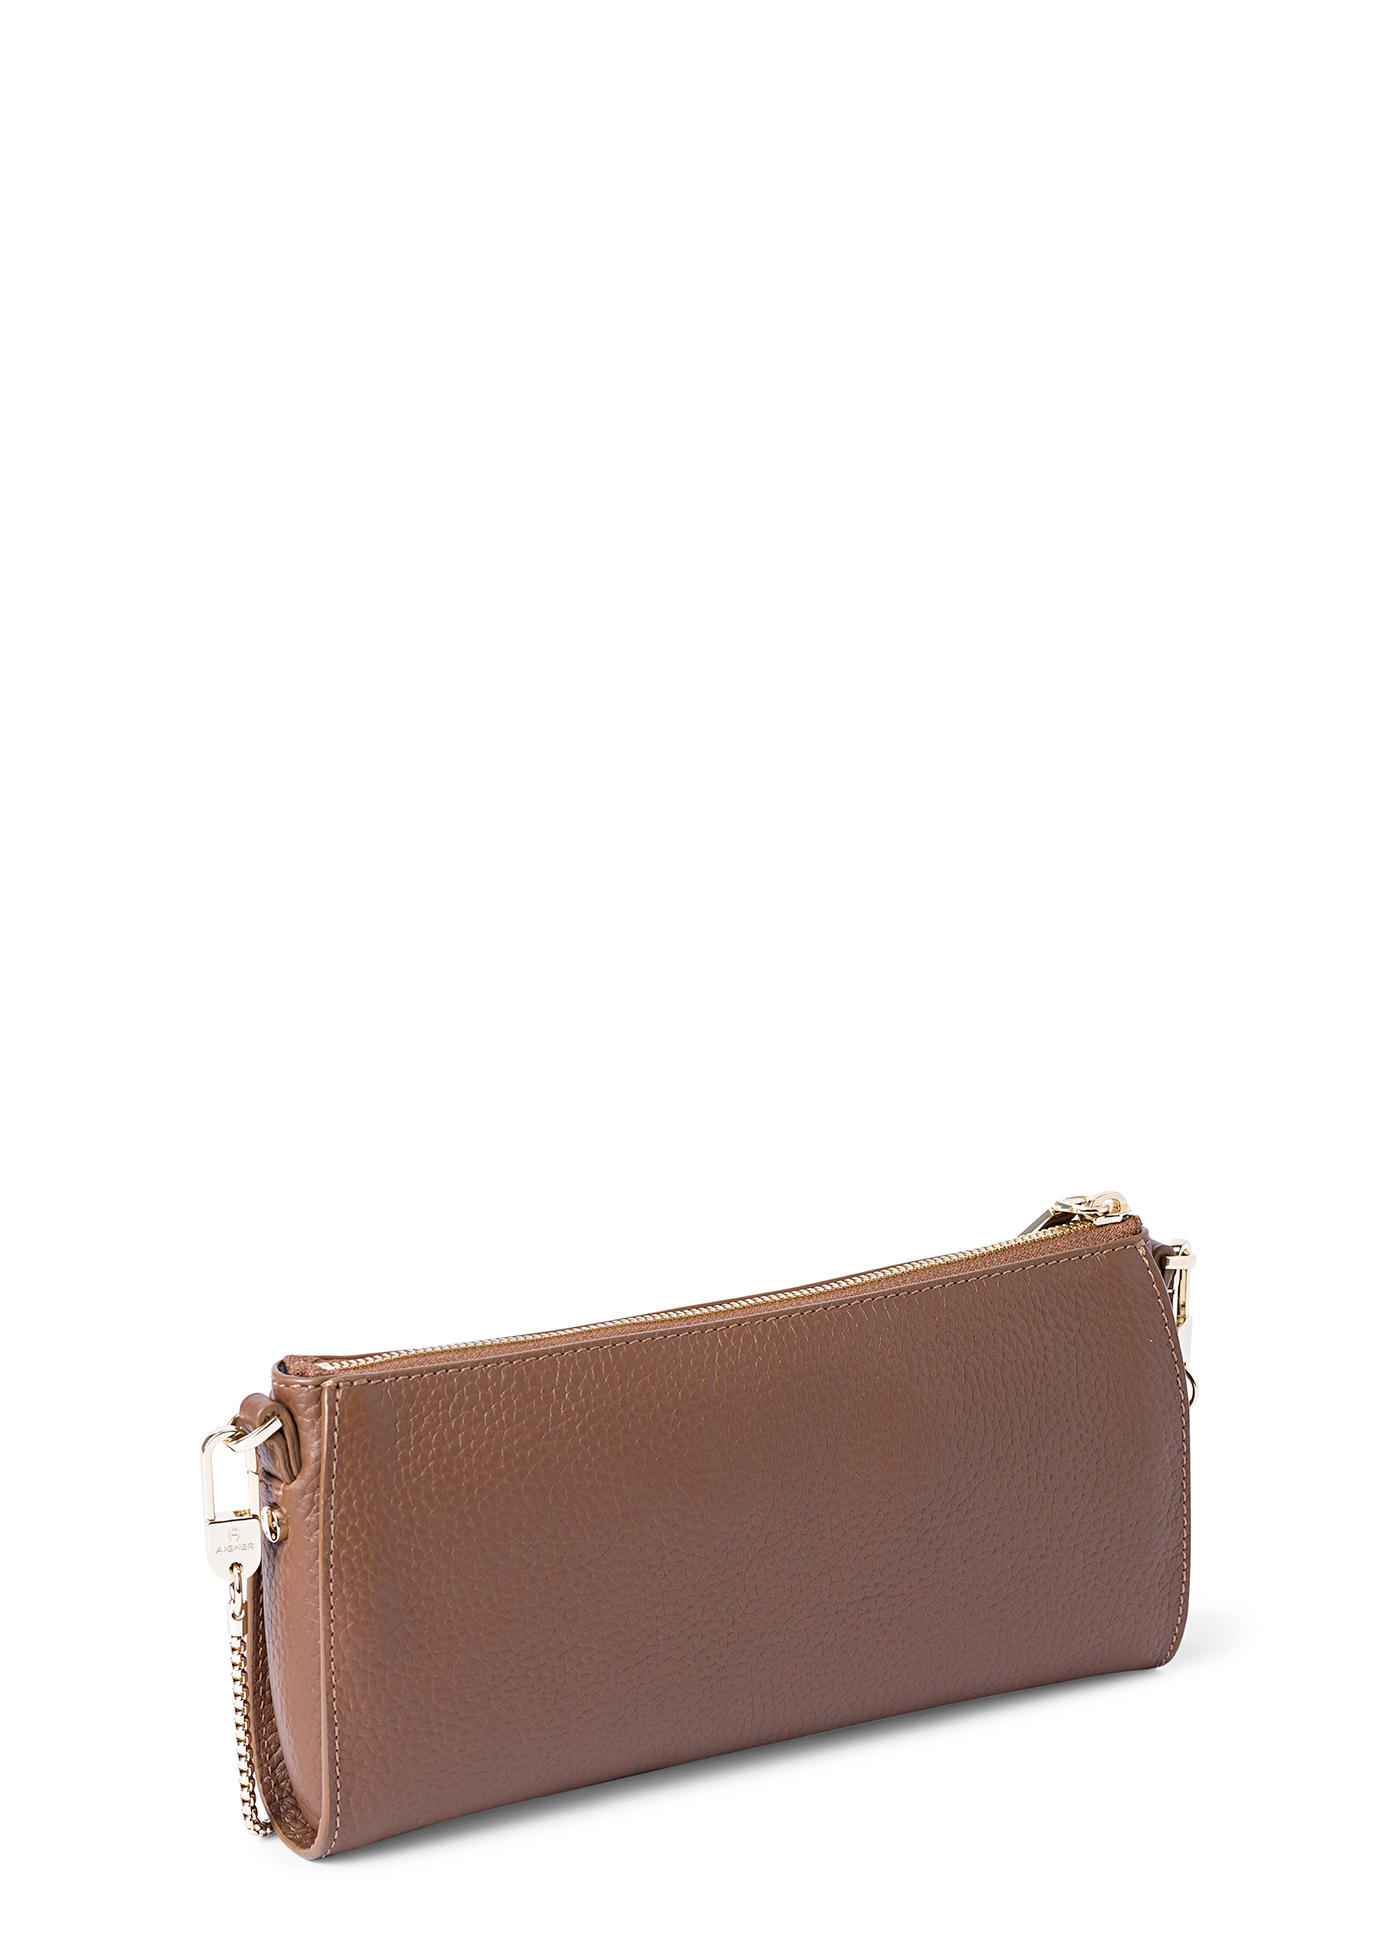 IVY S Cowhide Mini-Tasche image number 1